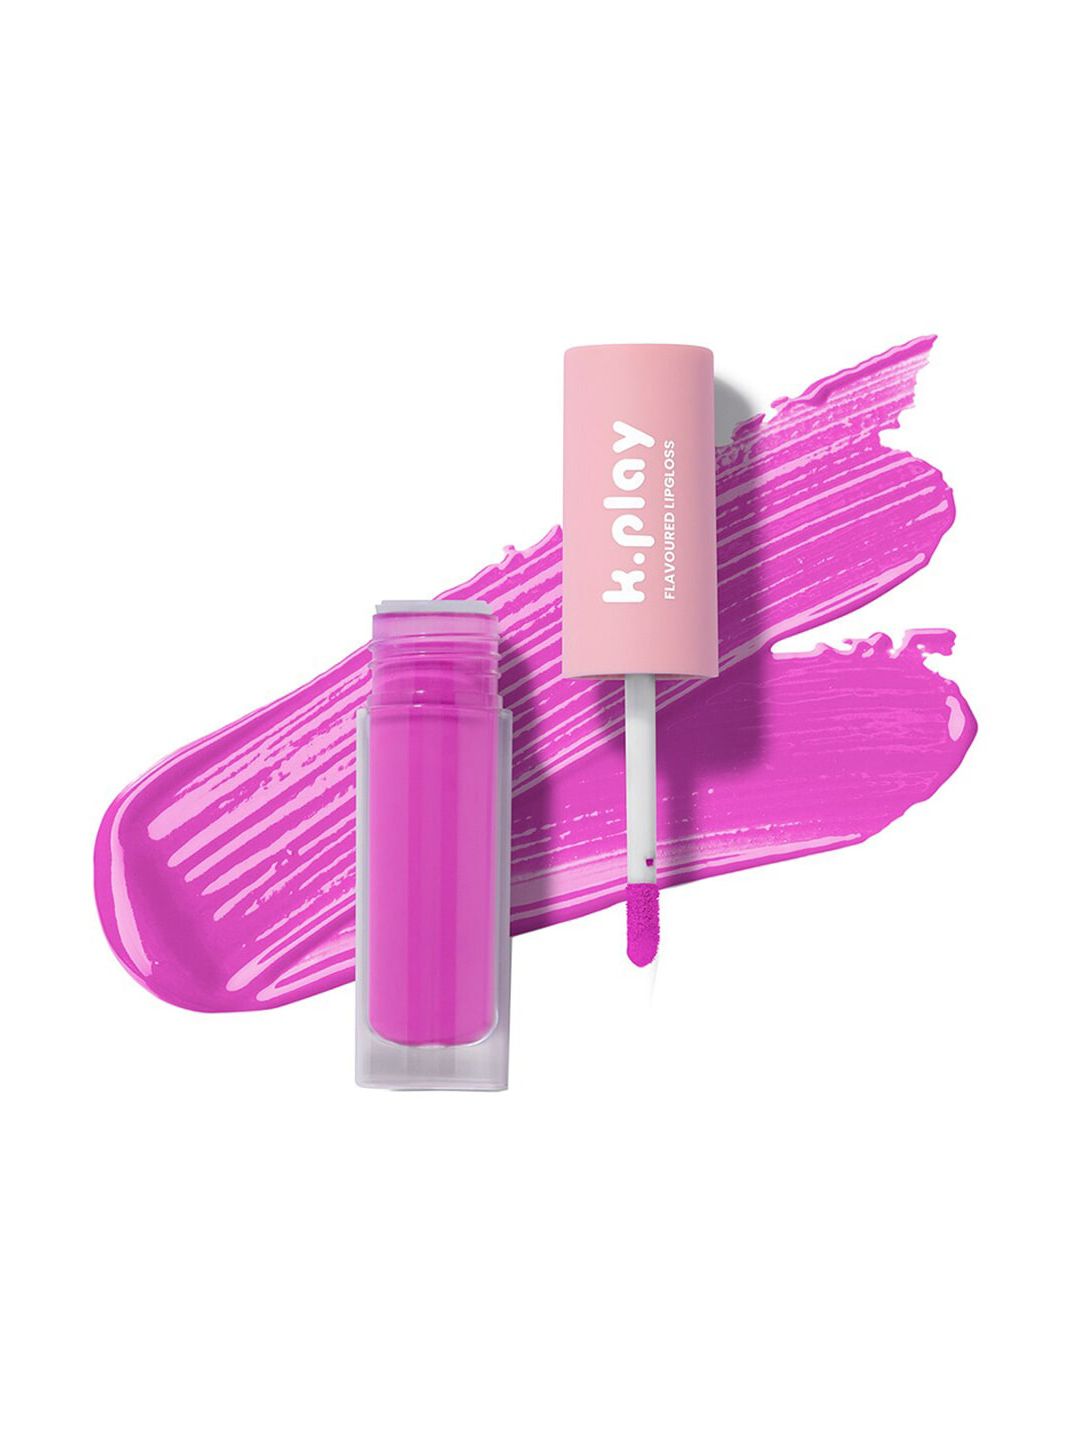 MyGlamm K.Play Flavoured Lipgloss-Lychee Twirl-4.5ml Price in India